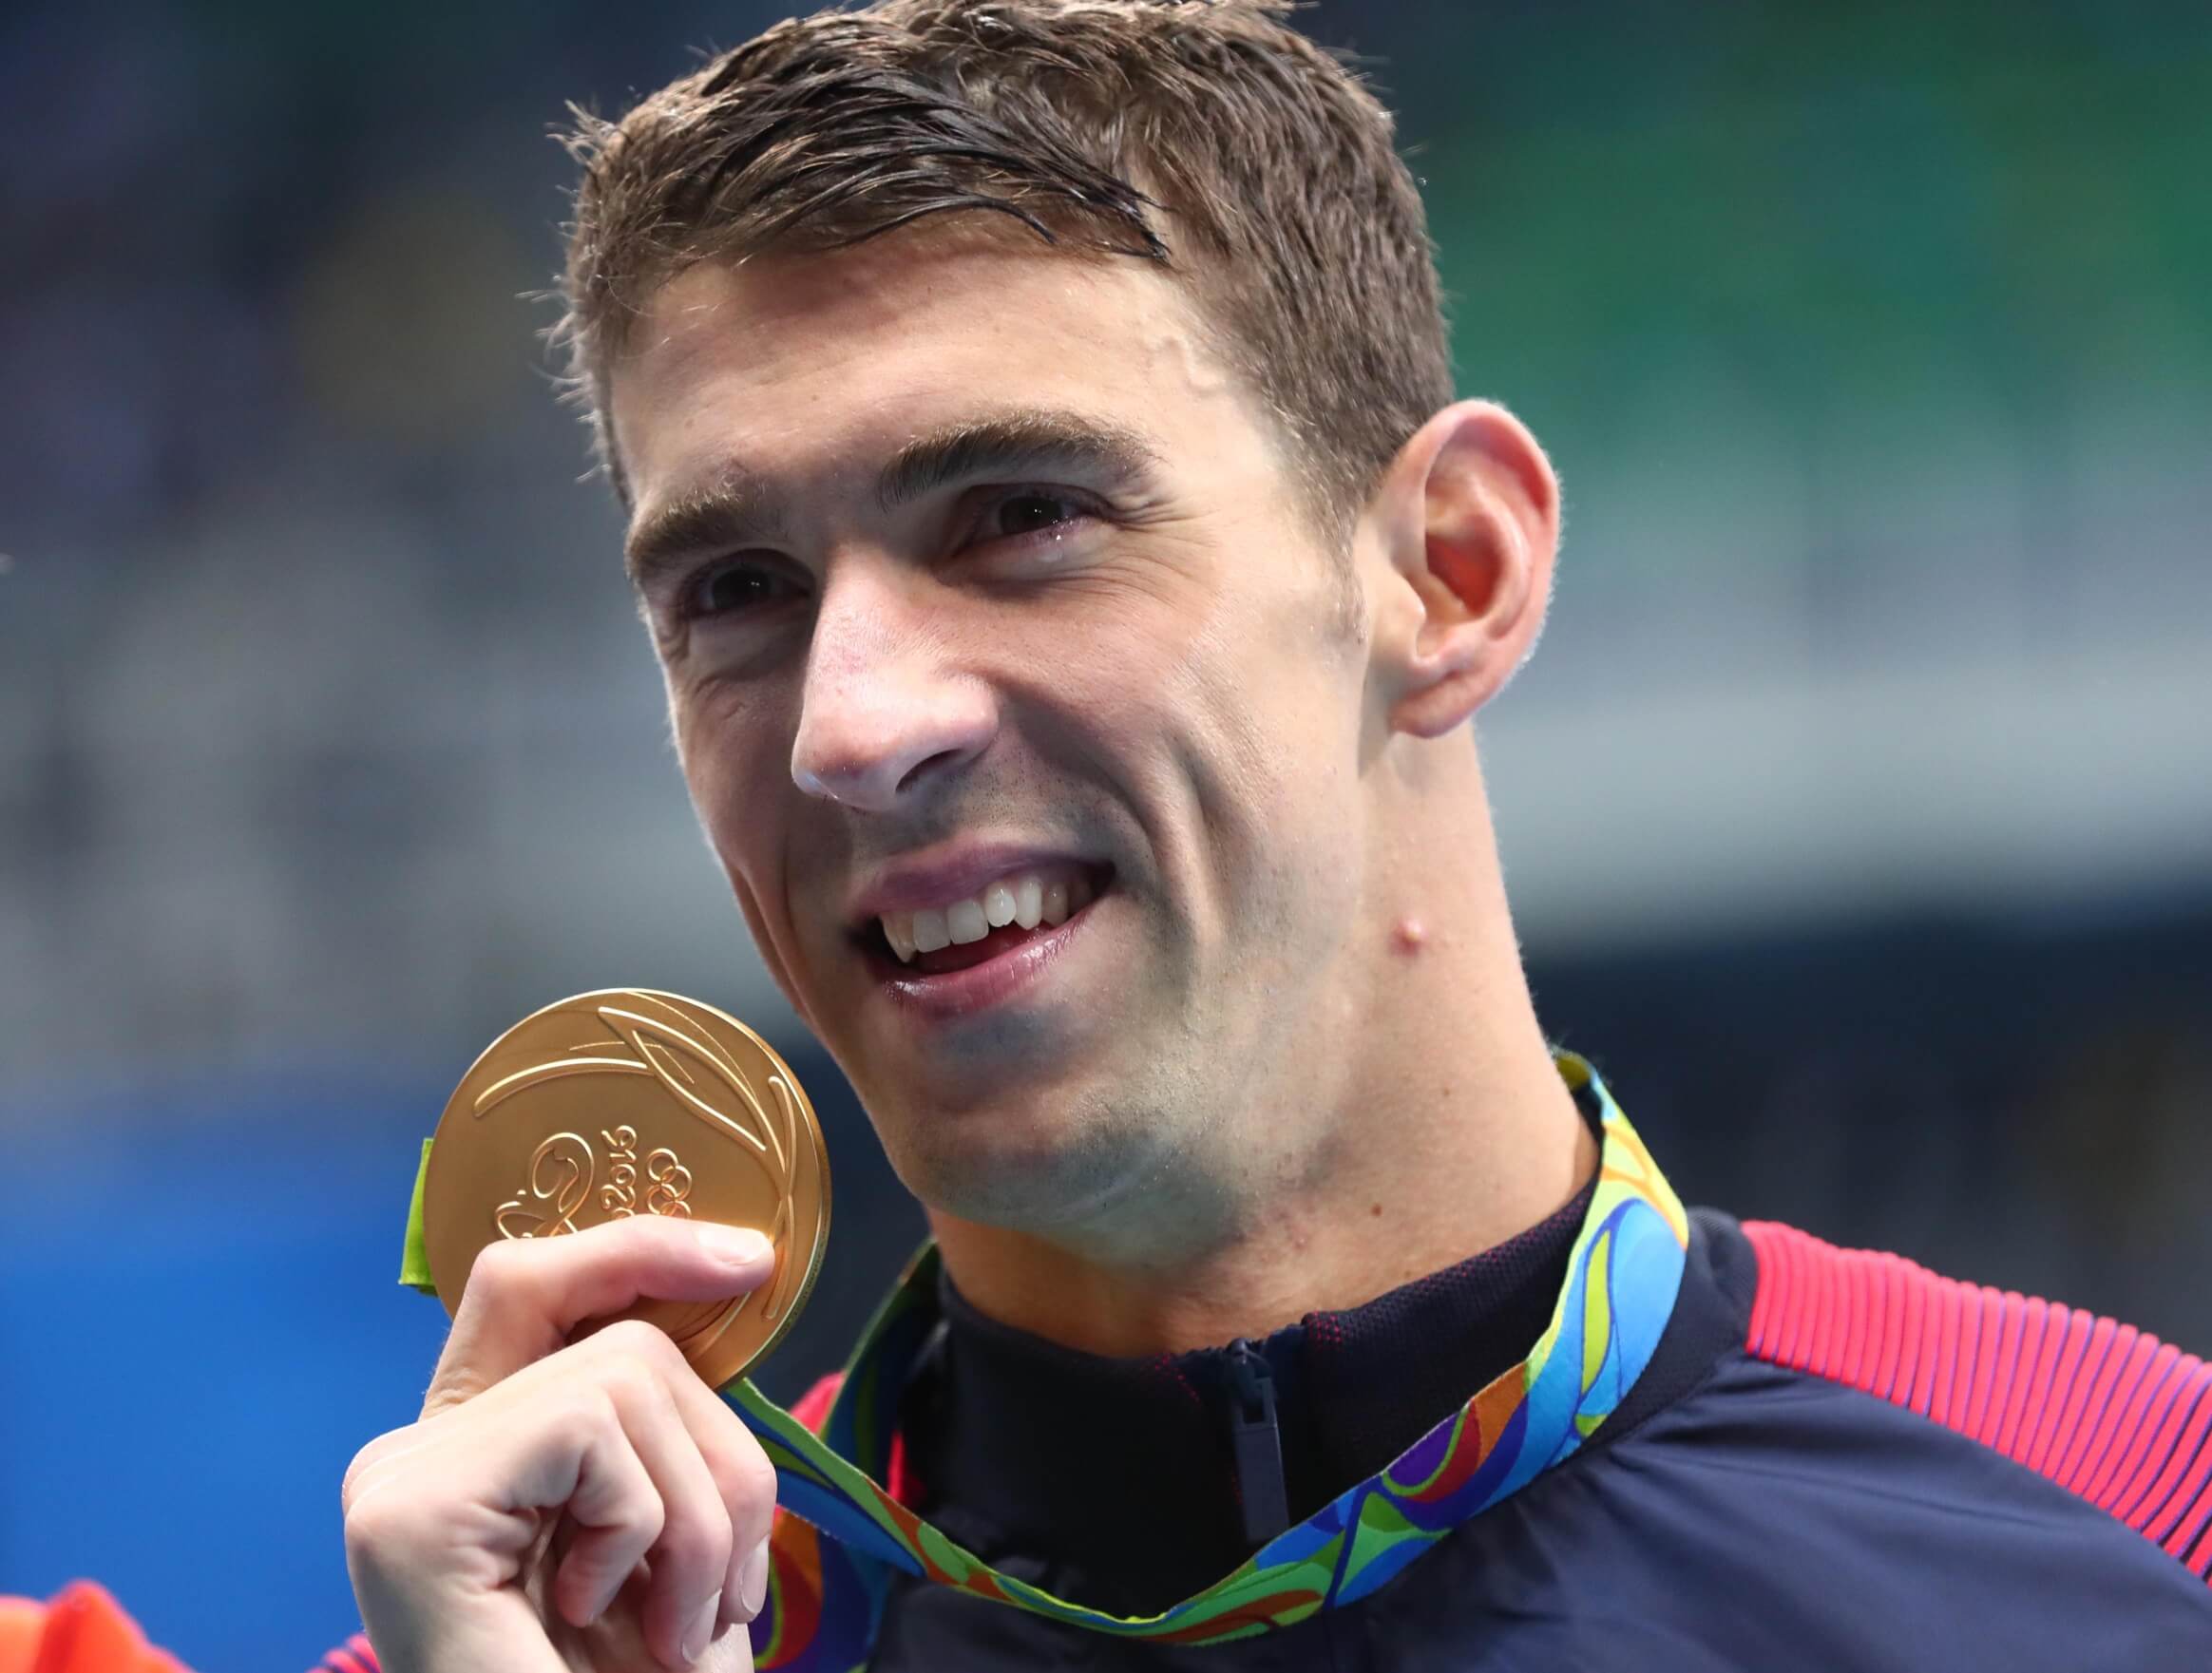 Michael Phelps USA. Win the gold medal